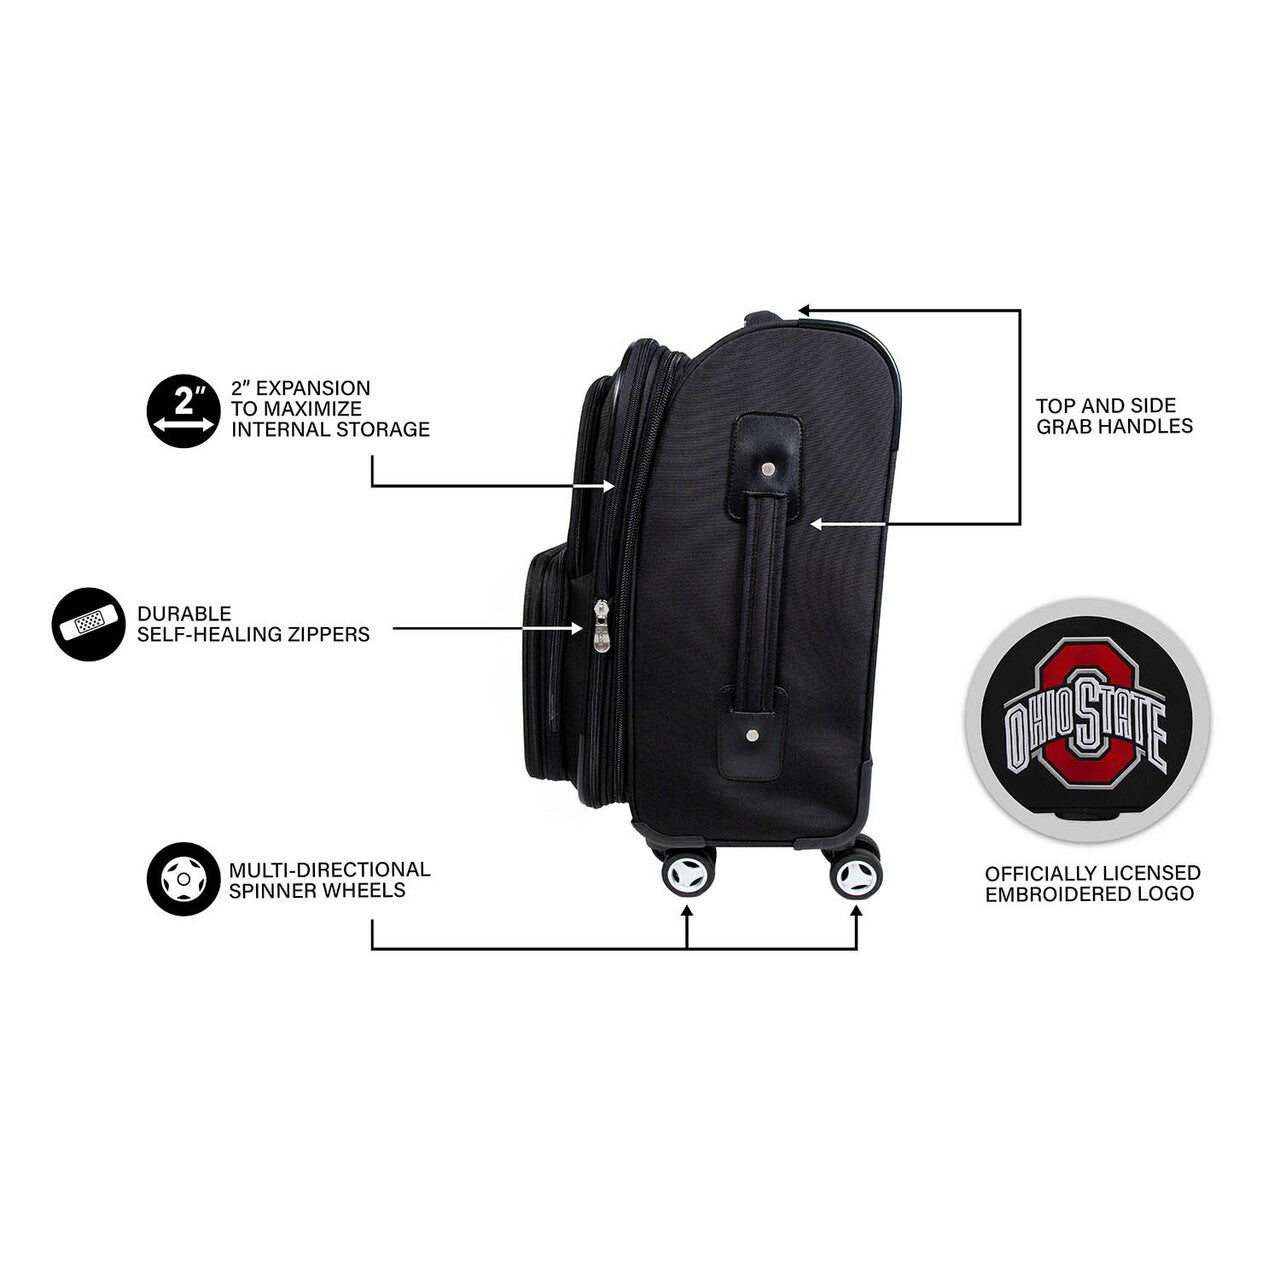 Los Angeles Clippers 21" Carry-on Spinner Luggage